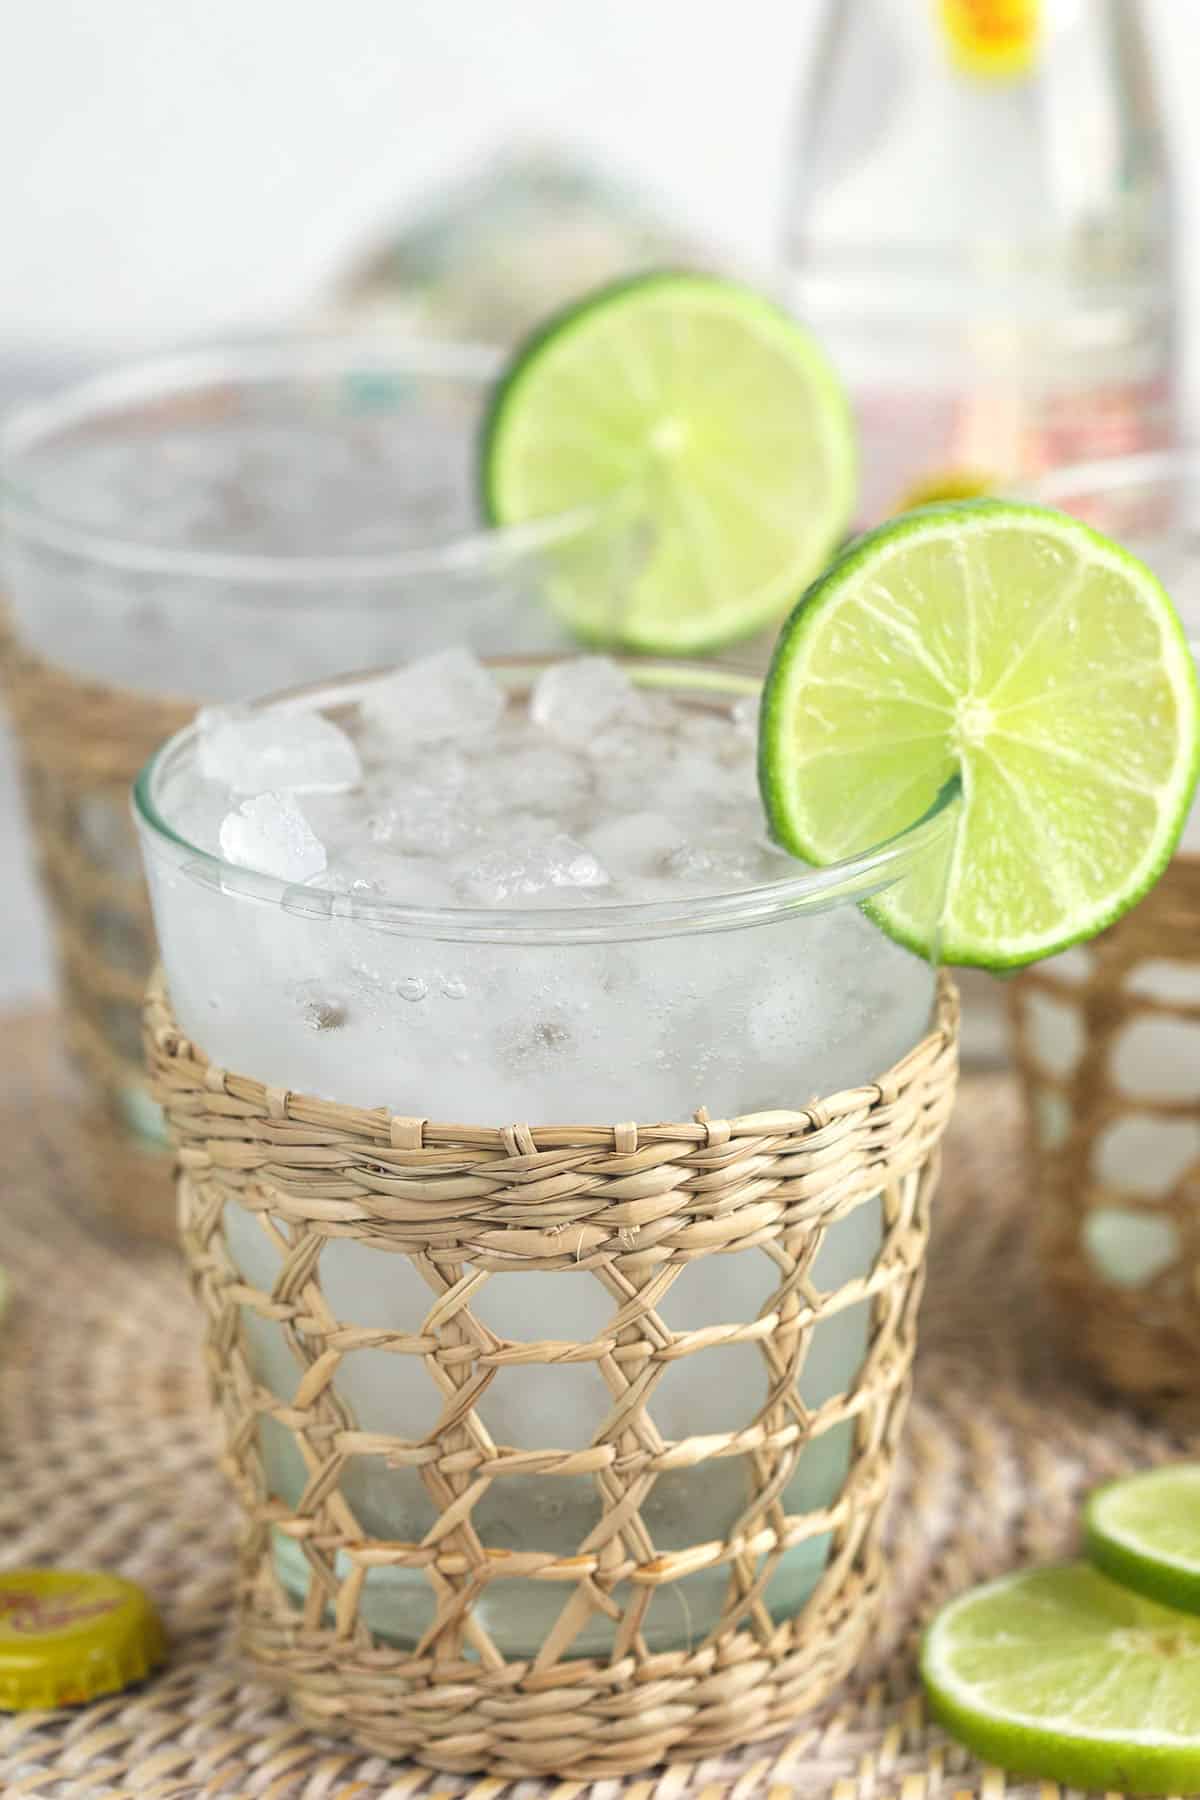 Limes are used as garnishes on the rims of several glasses.